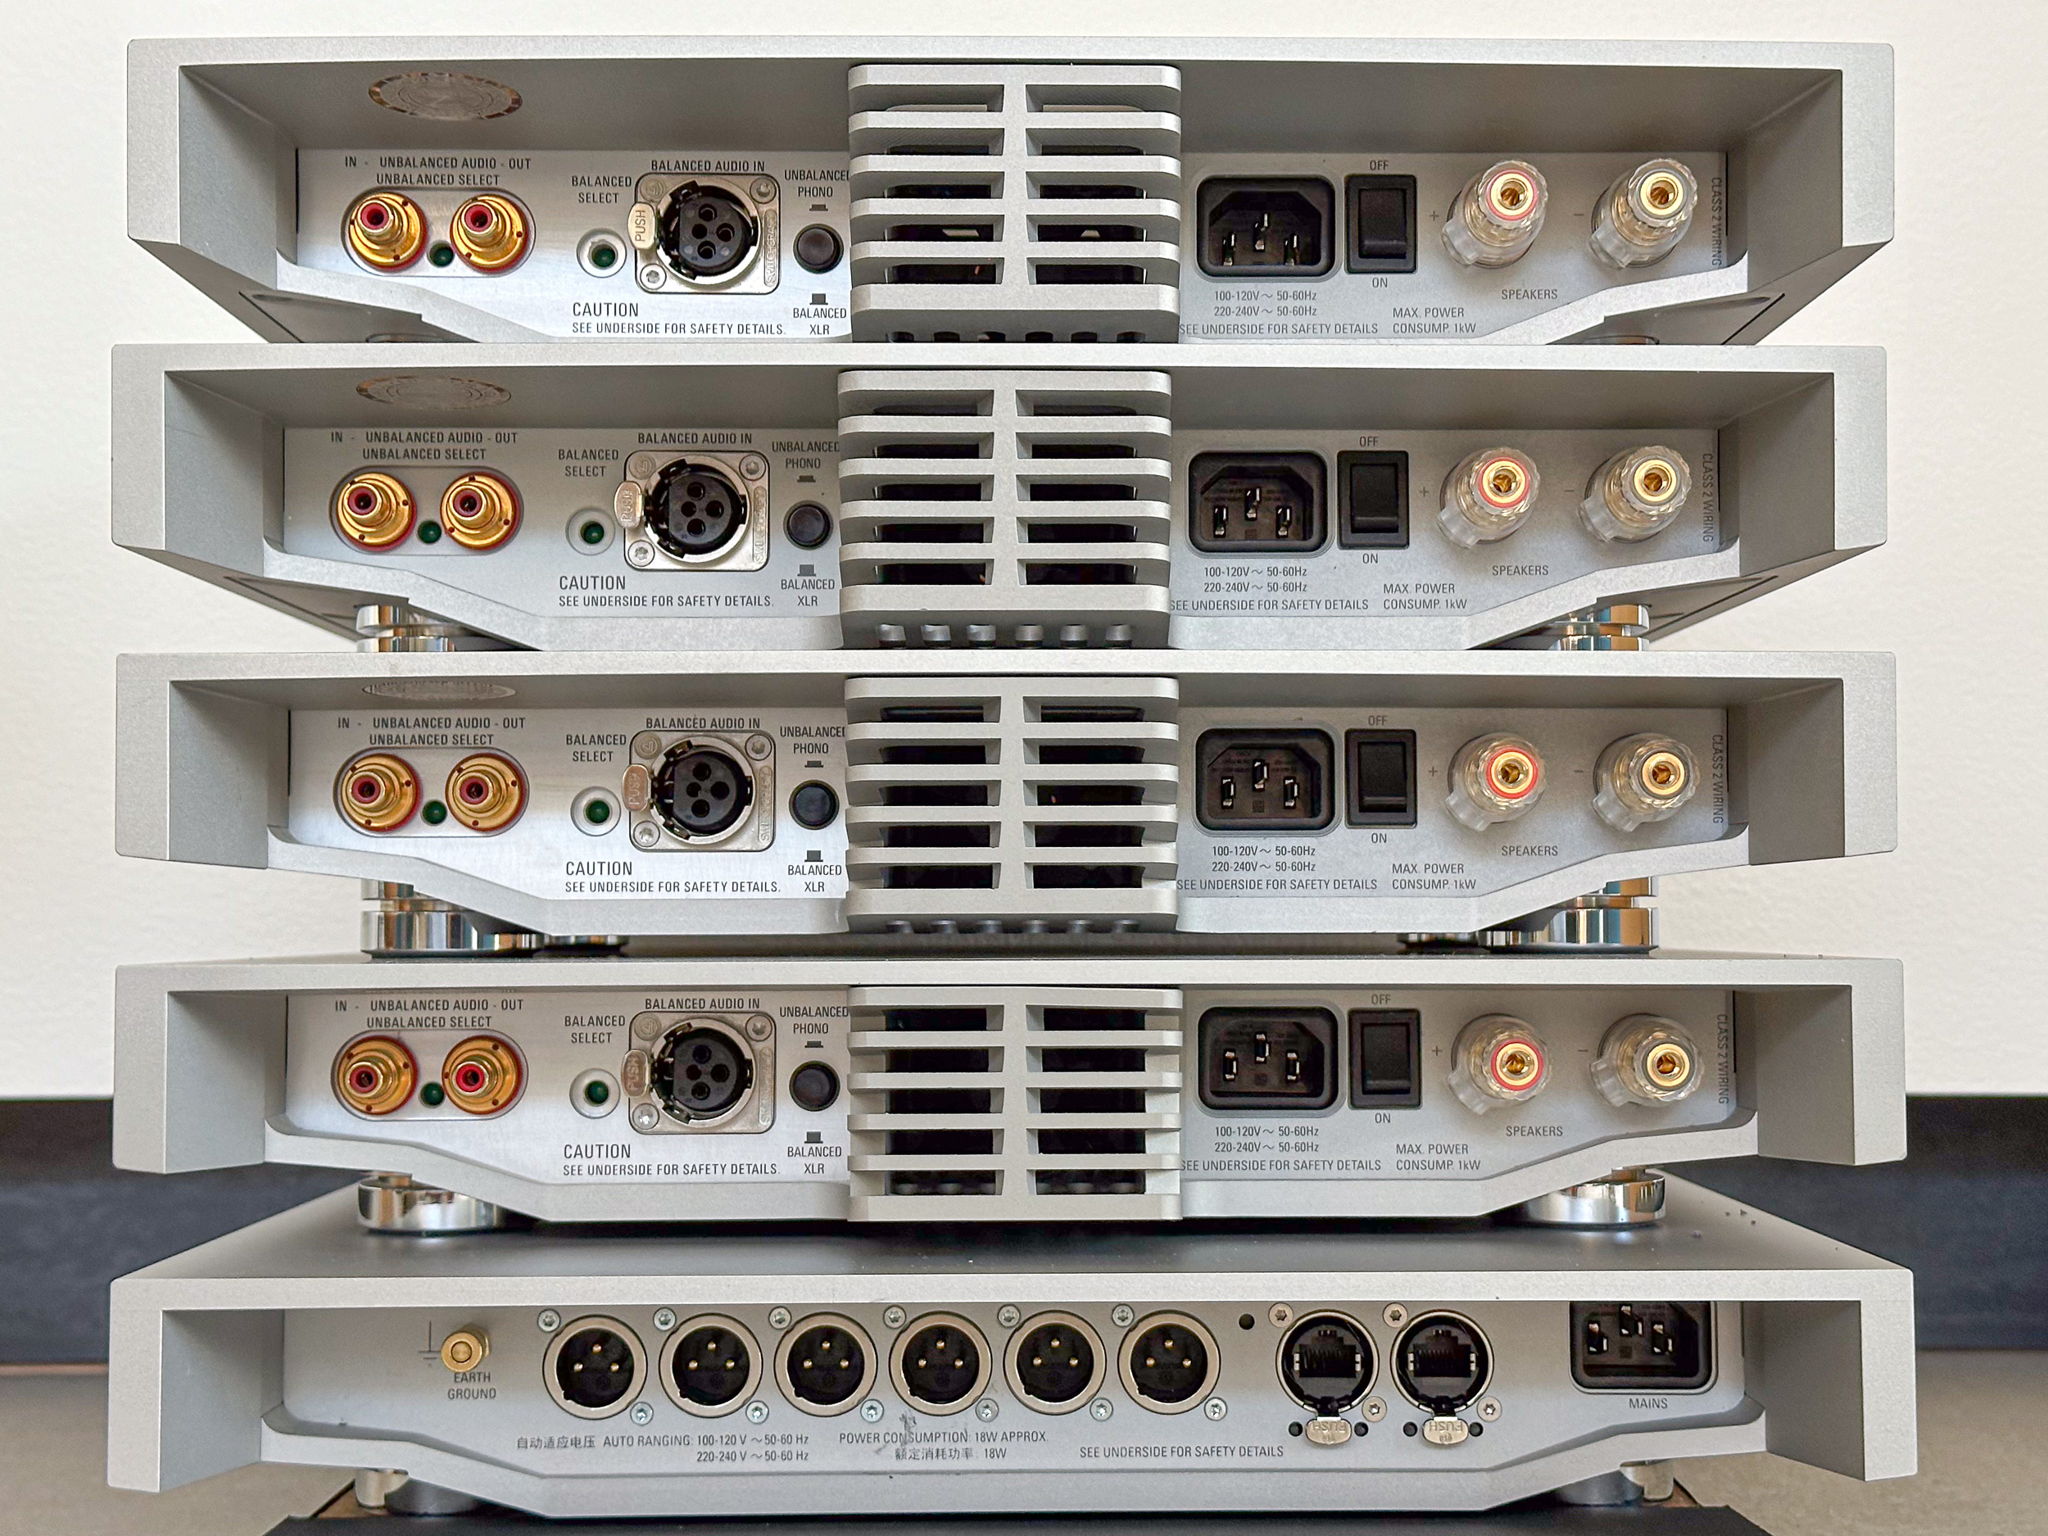 Here is a rear view of the stack. The system uses balanced XLR connectors from the Exaktbox (at the bottom) to each of the amplifiers. 